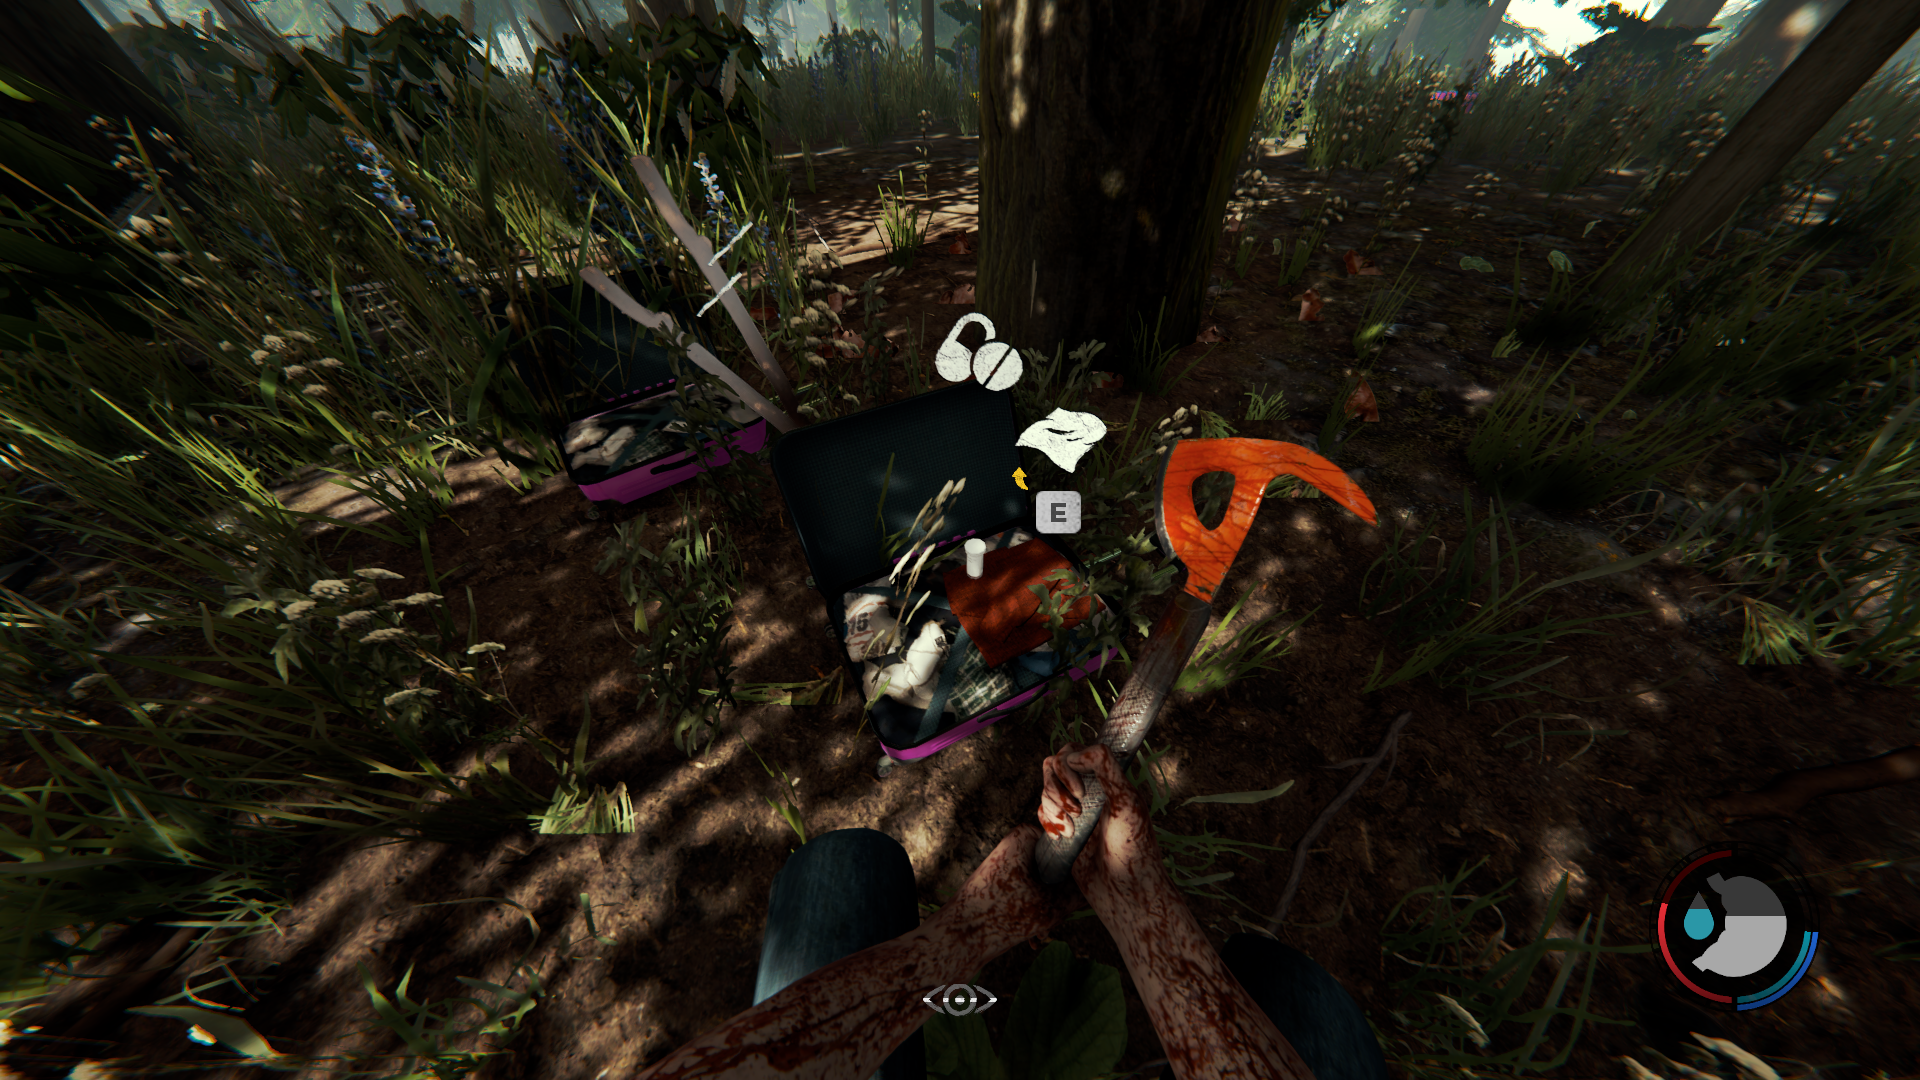 Is The Forest on Xbox One? – TechCult